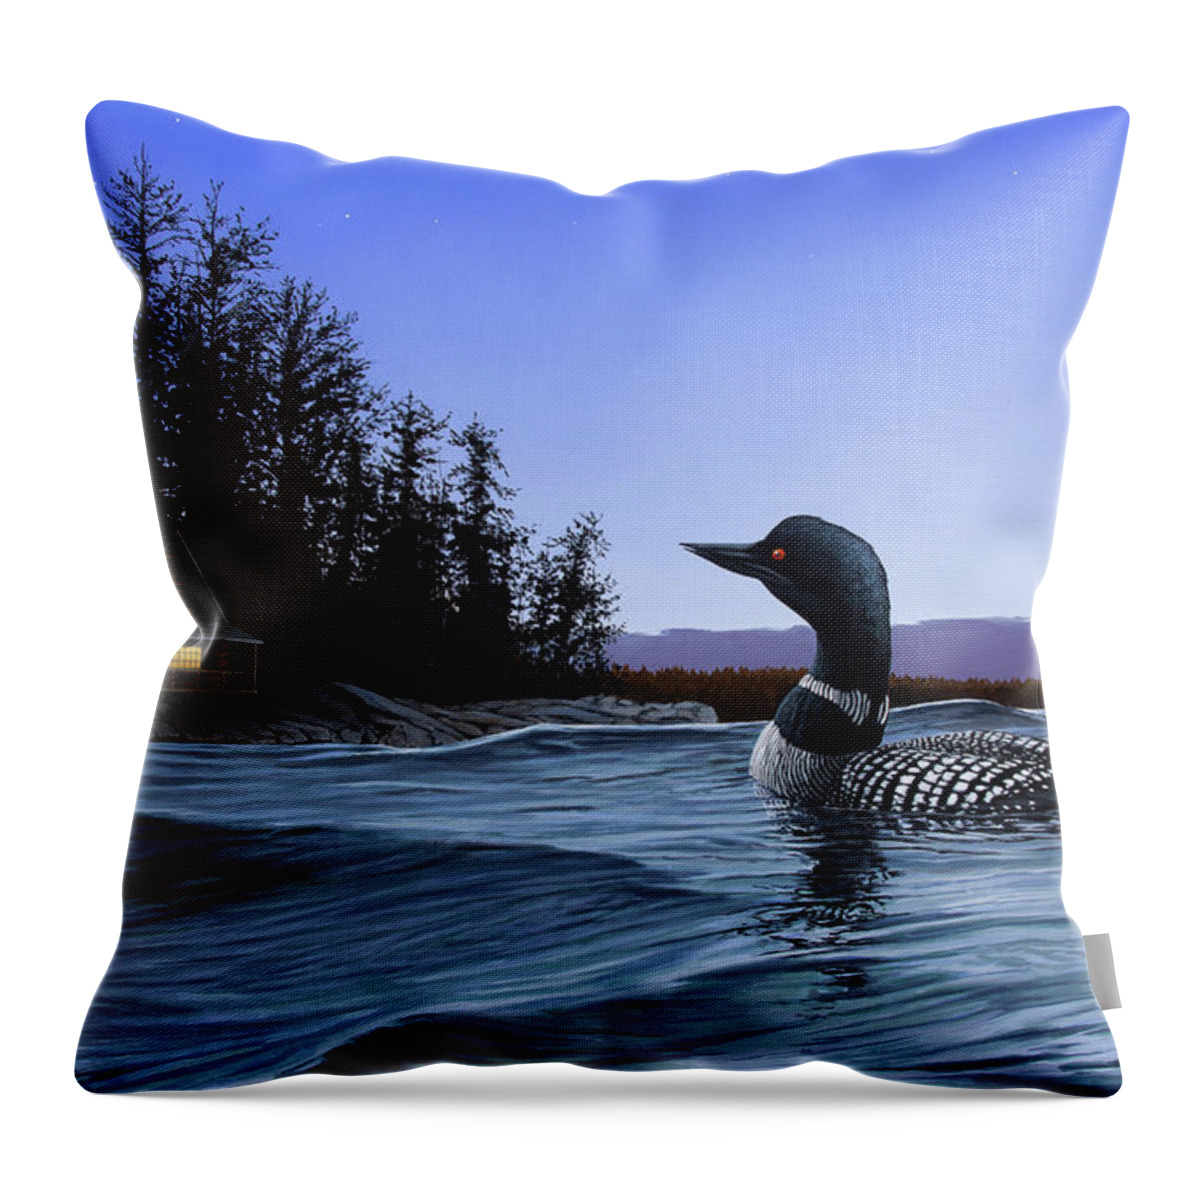 Loon Throw Pillow featuring the painting North Shore Lodge by Anthony J Padgett